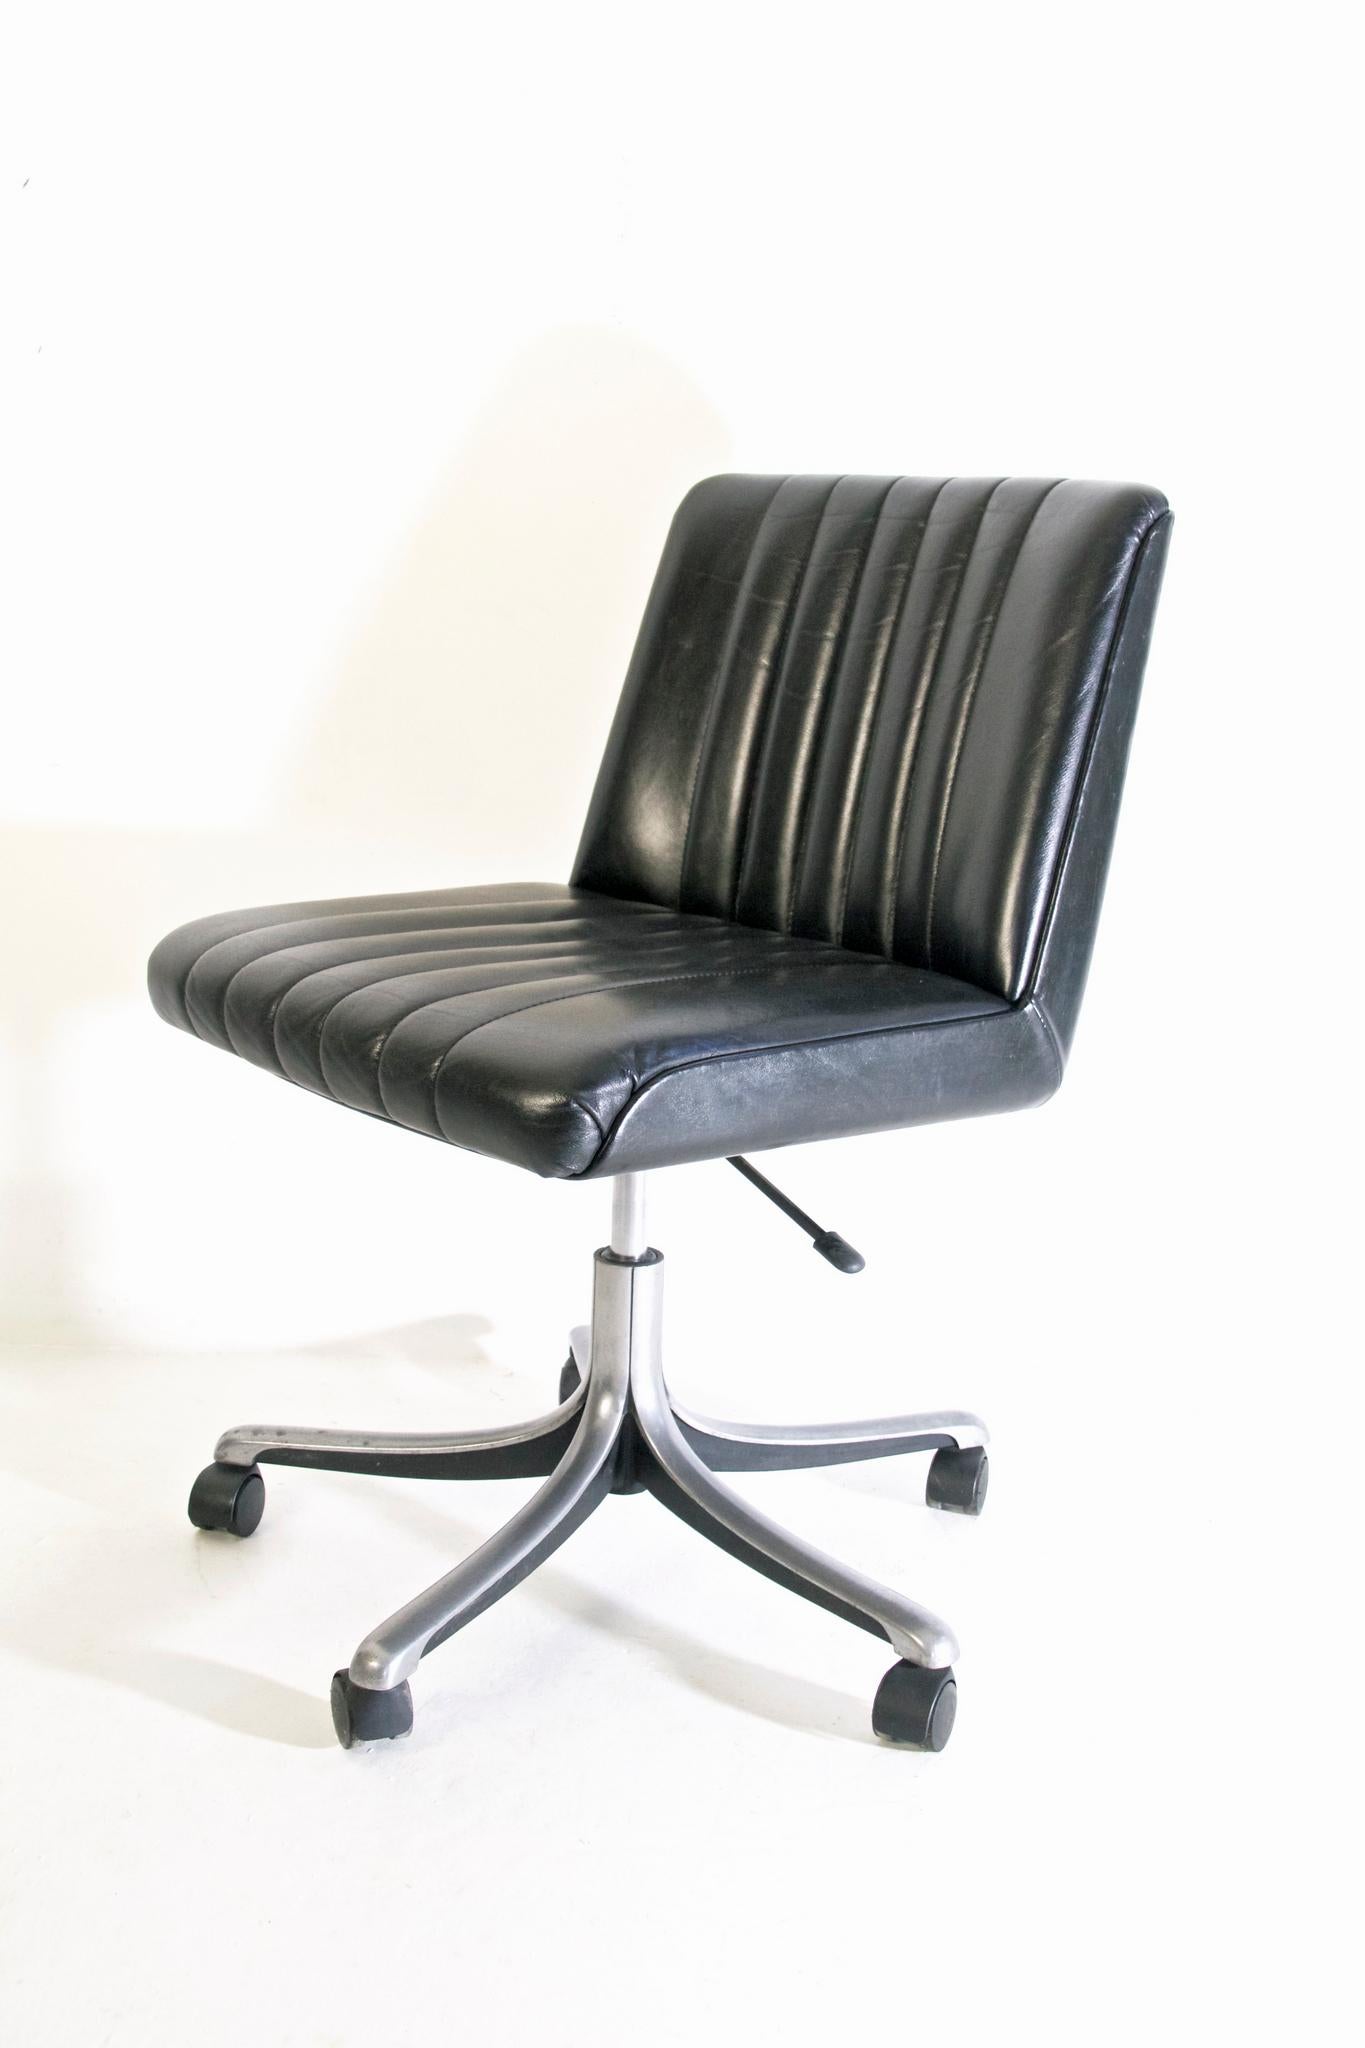 Desk chair designed by Osvaldo Borsani and manufactured by Tecno, Italy 1966-1976. This chair is from the P125 series which were produced in different editions. This particular chair has a five star wheel base and the padded upholstery in black